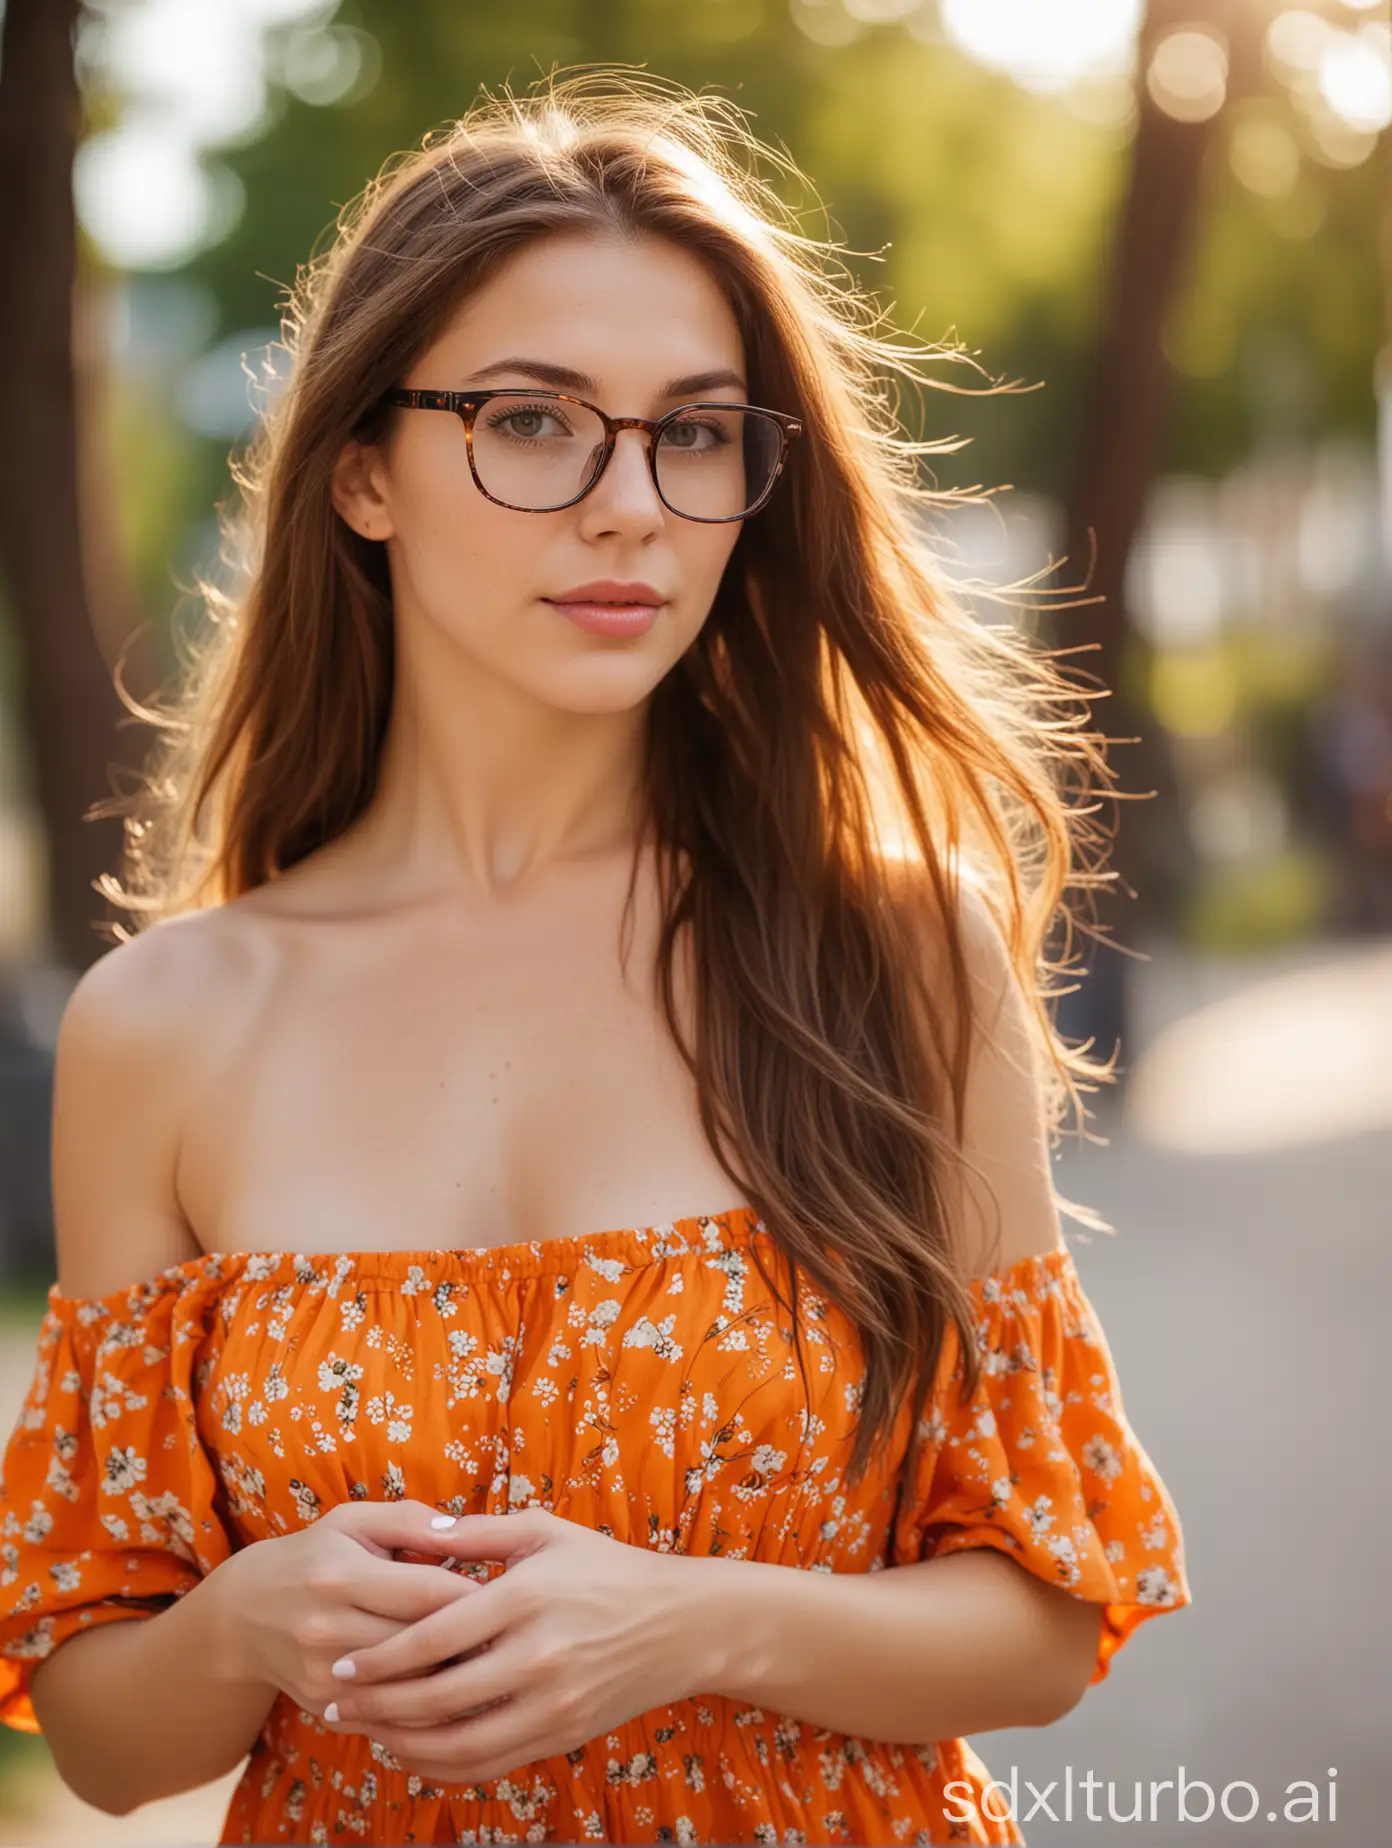 young Caucasian woman, long brown hair, slim body, small breasts, wearing orange sundress and white sneakers, wearing reading glasses, bokeh, close up